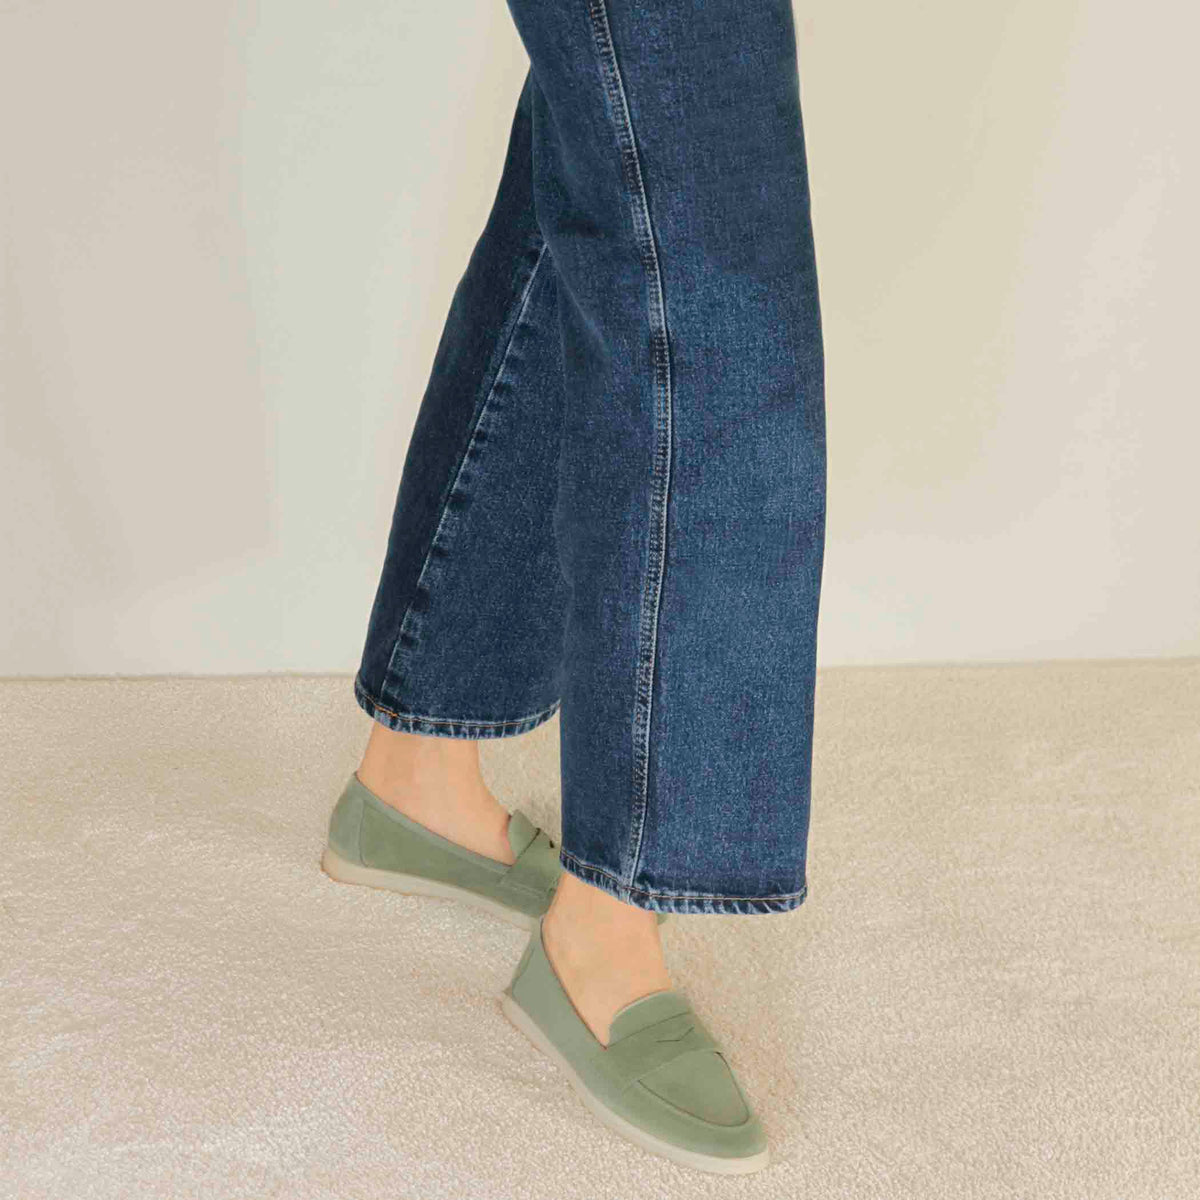 Classic women's moccasin in green suede